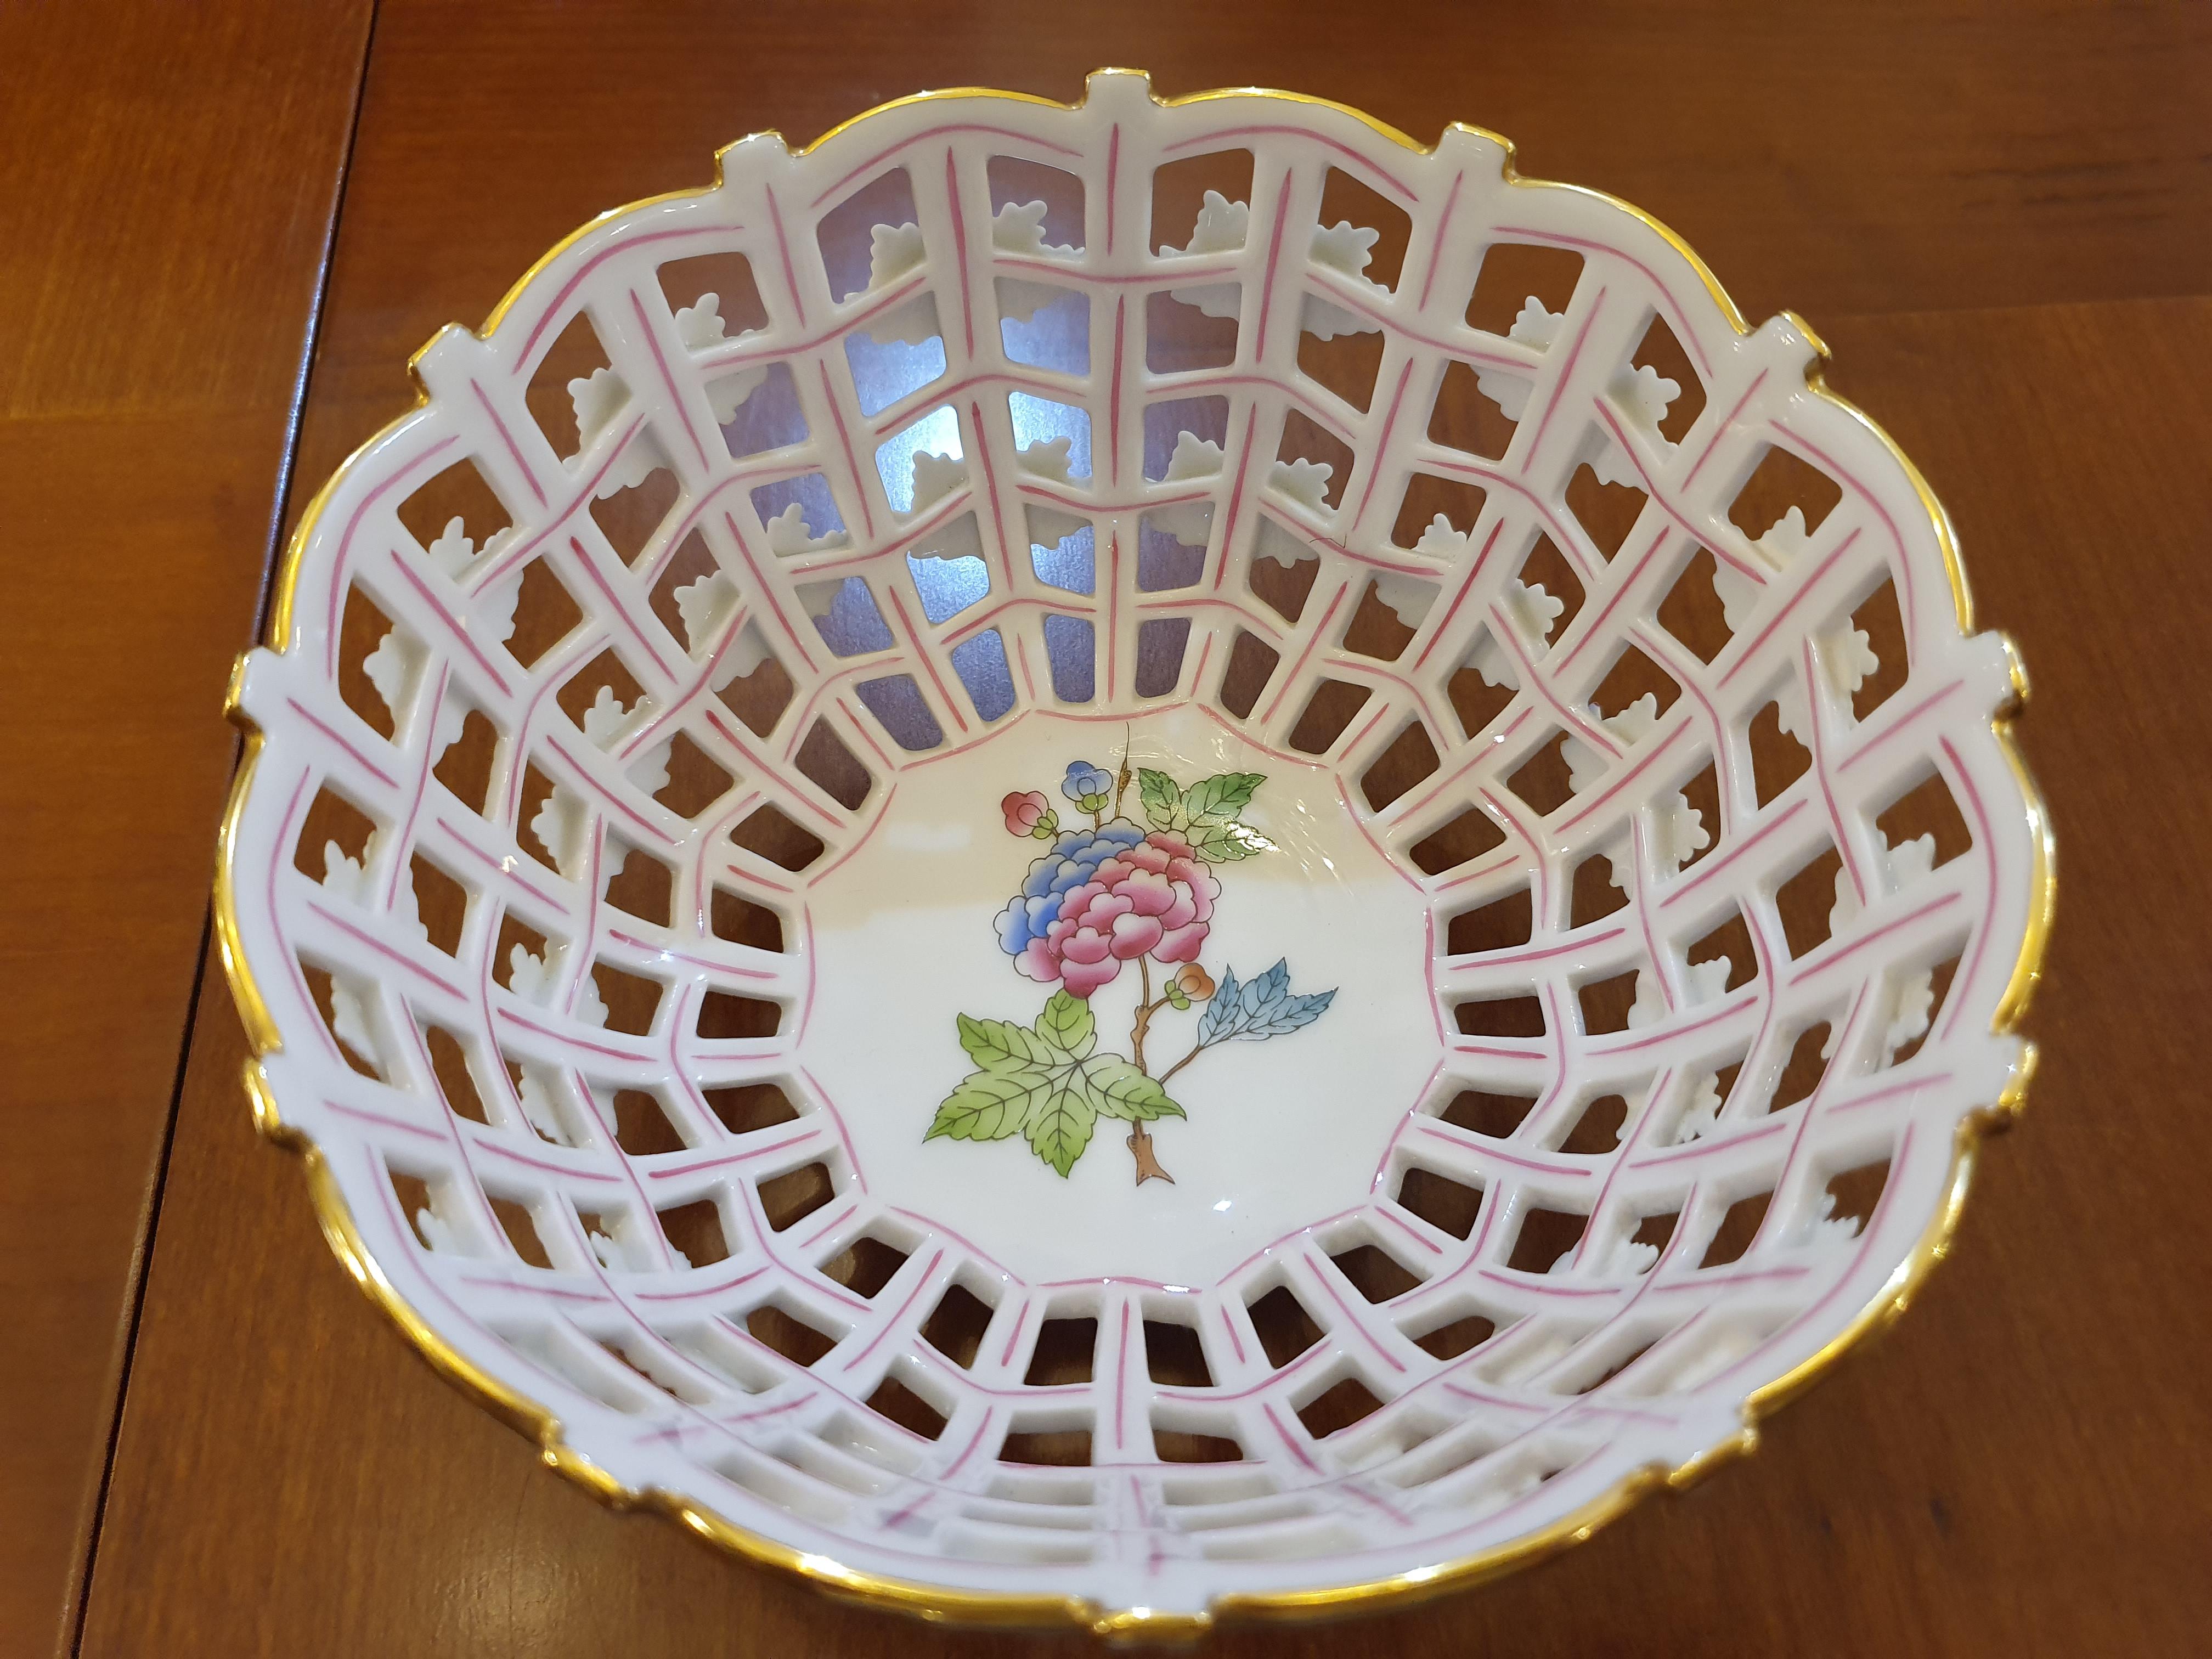 Magnificent basket in Hungarian porcelain handmade and hand paited with flowers and butterflies decoration, multicolor.
The Victoria decor is one of the most important of Herend since it was chosen by the great Queen Victoria in 1851 during the